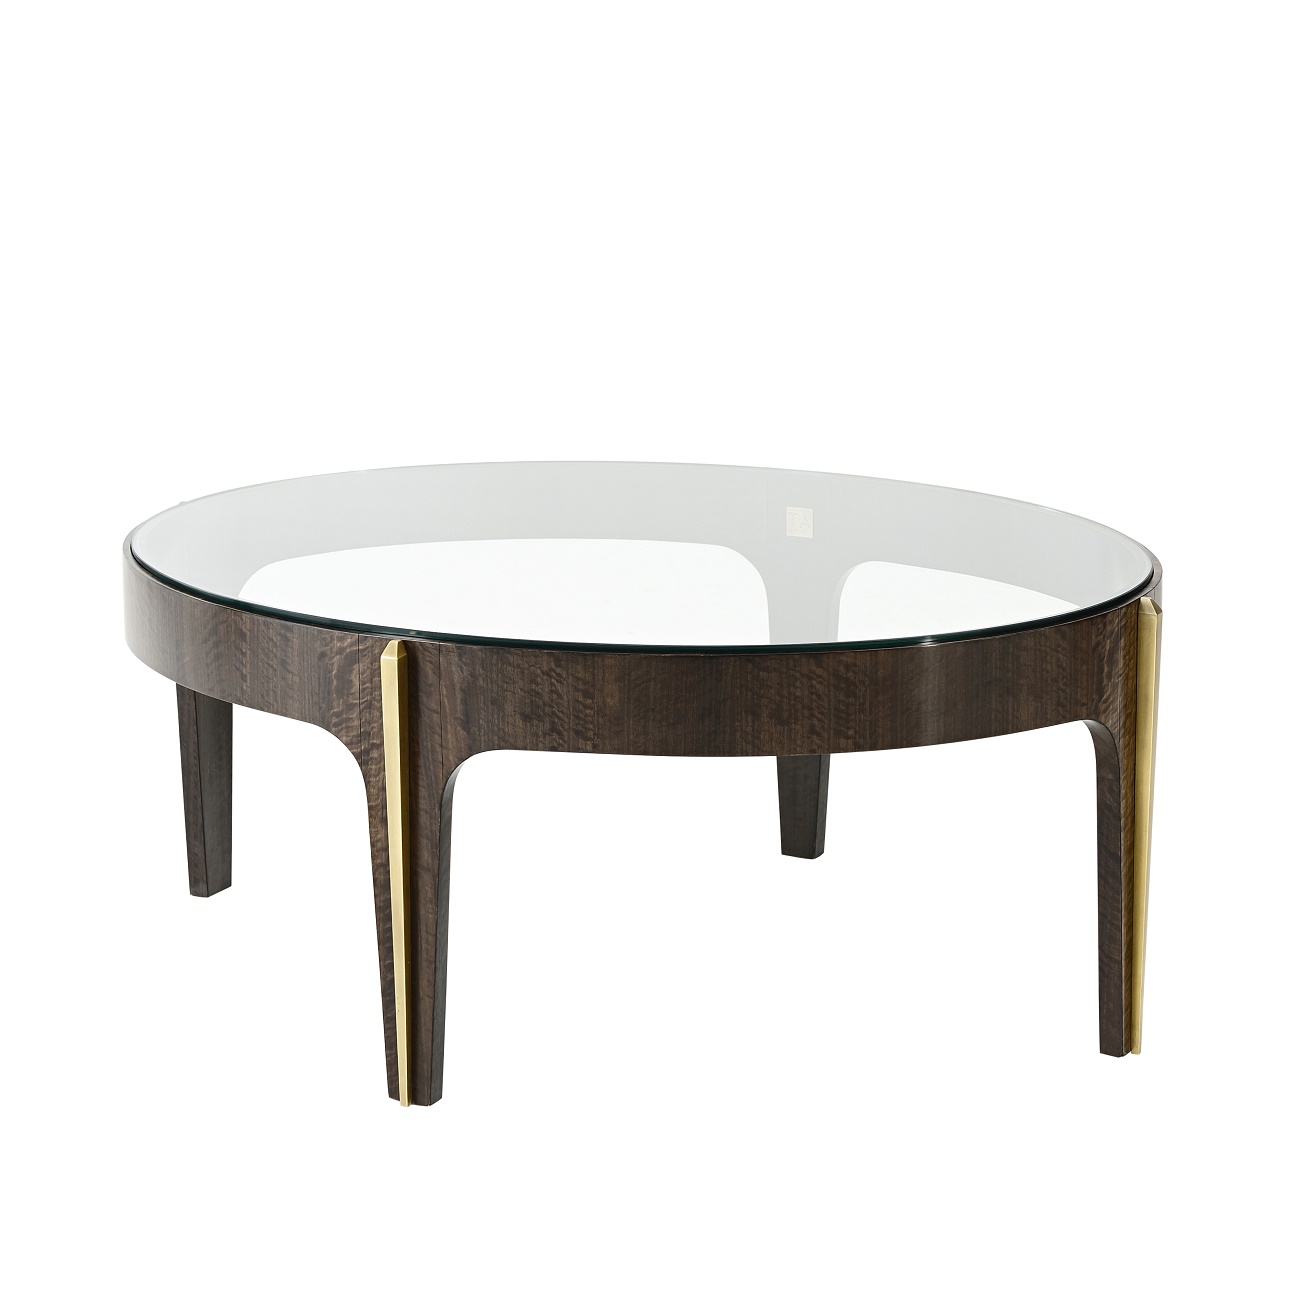 Cocktail Table for Sale, Brooklyn, Furniture by ABD, Theodore Alexander